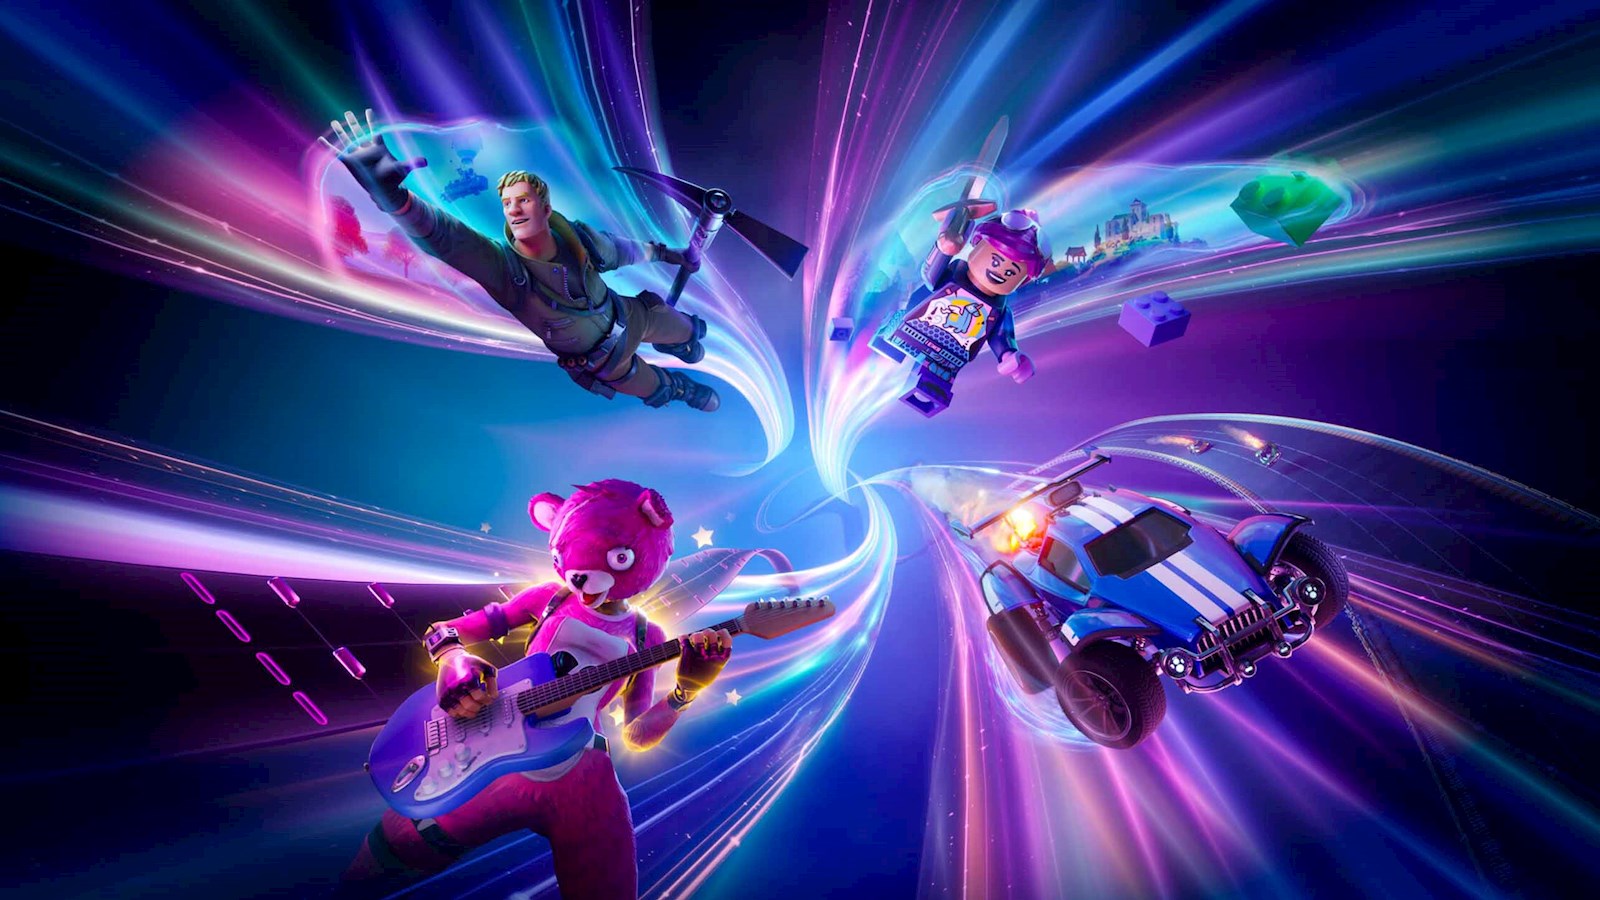 Four animated characters engaged in dynamic actions with colourful light beams against a dark background, involving flying, playing guitar, and racing.